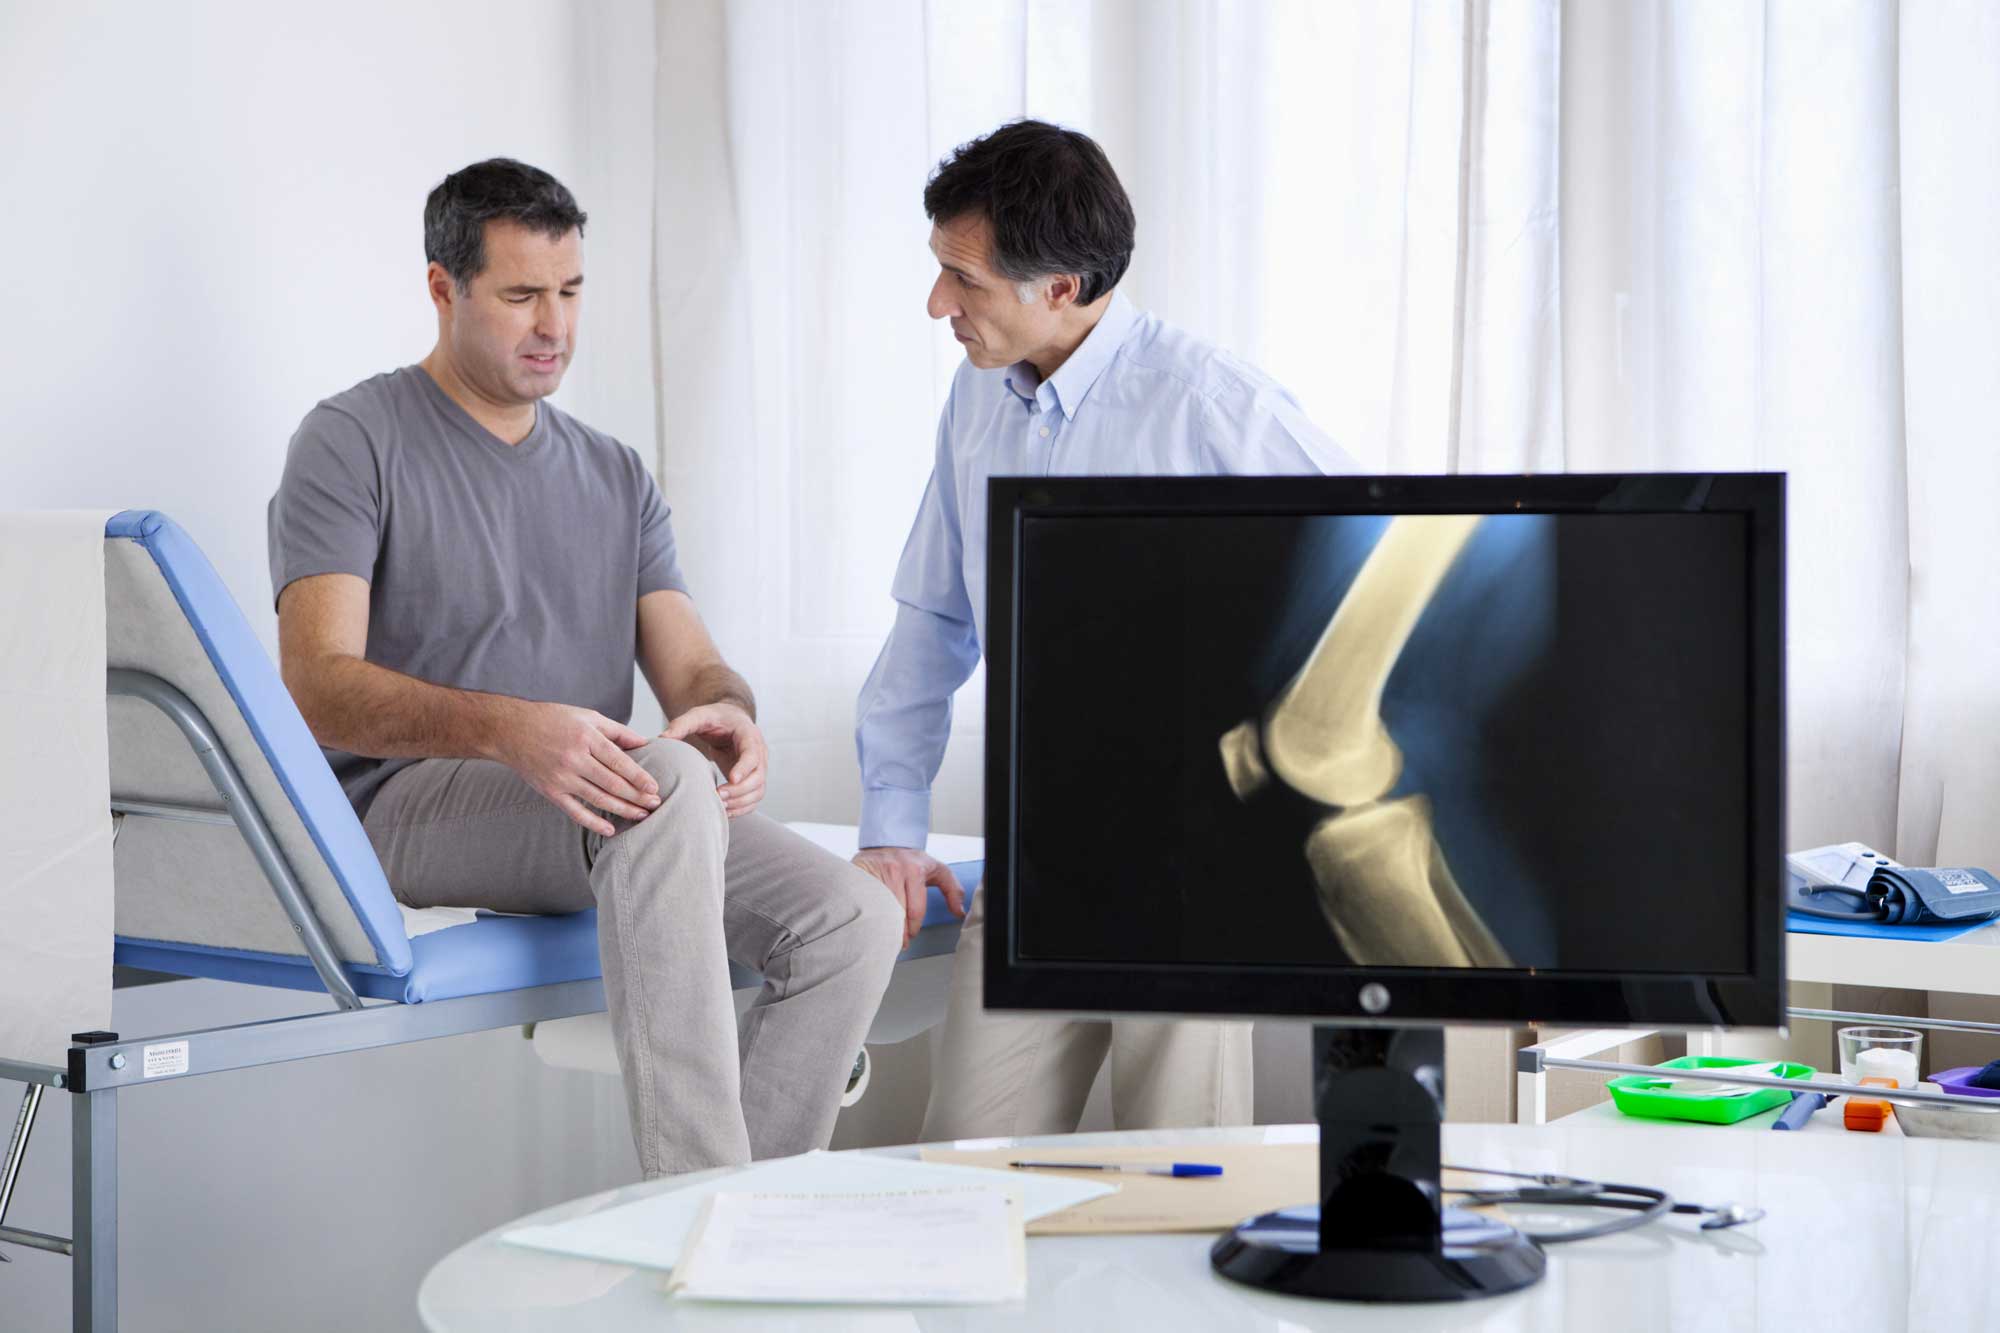 Doctor and patient addressing a knee injury